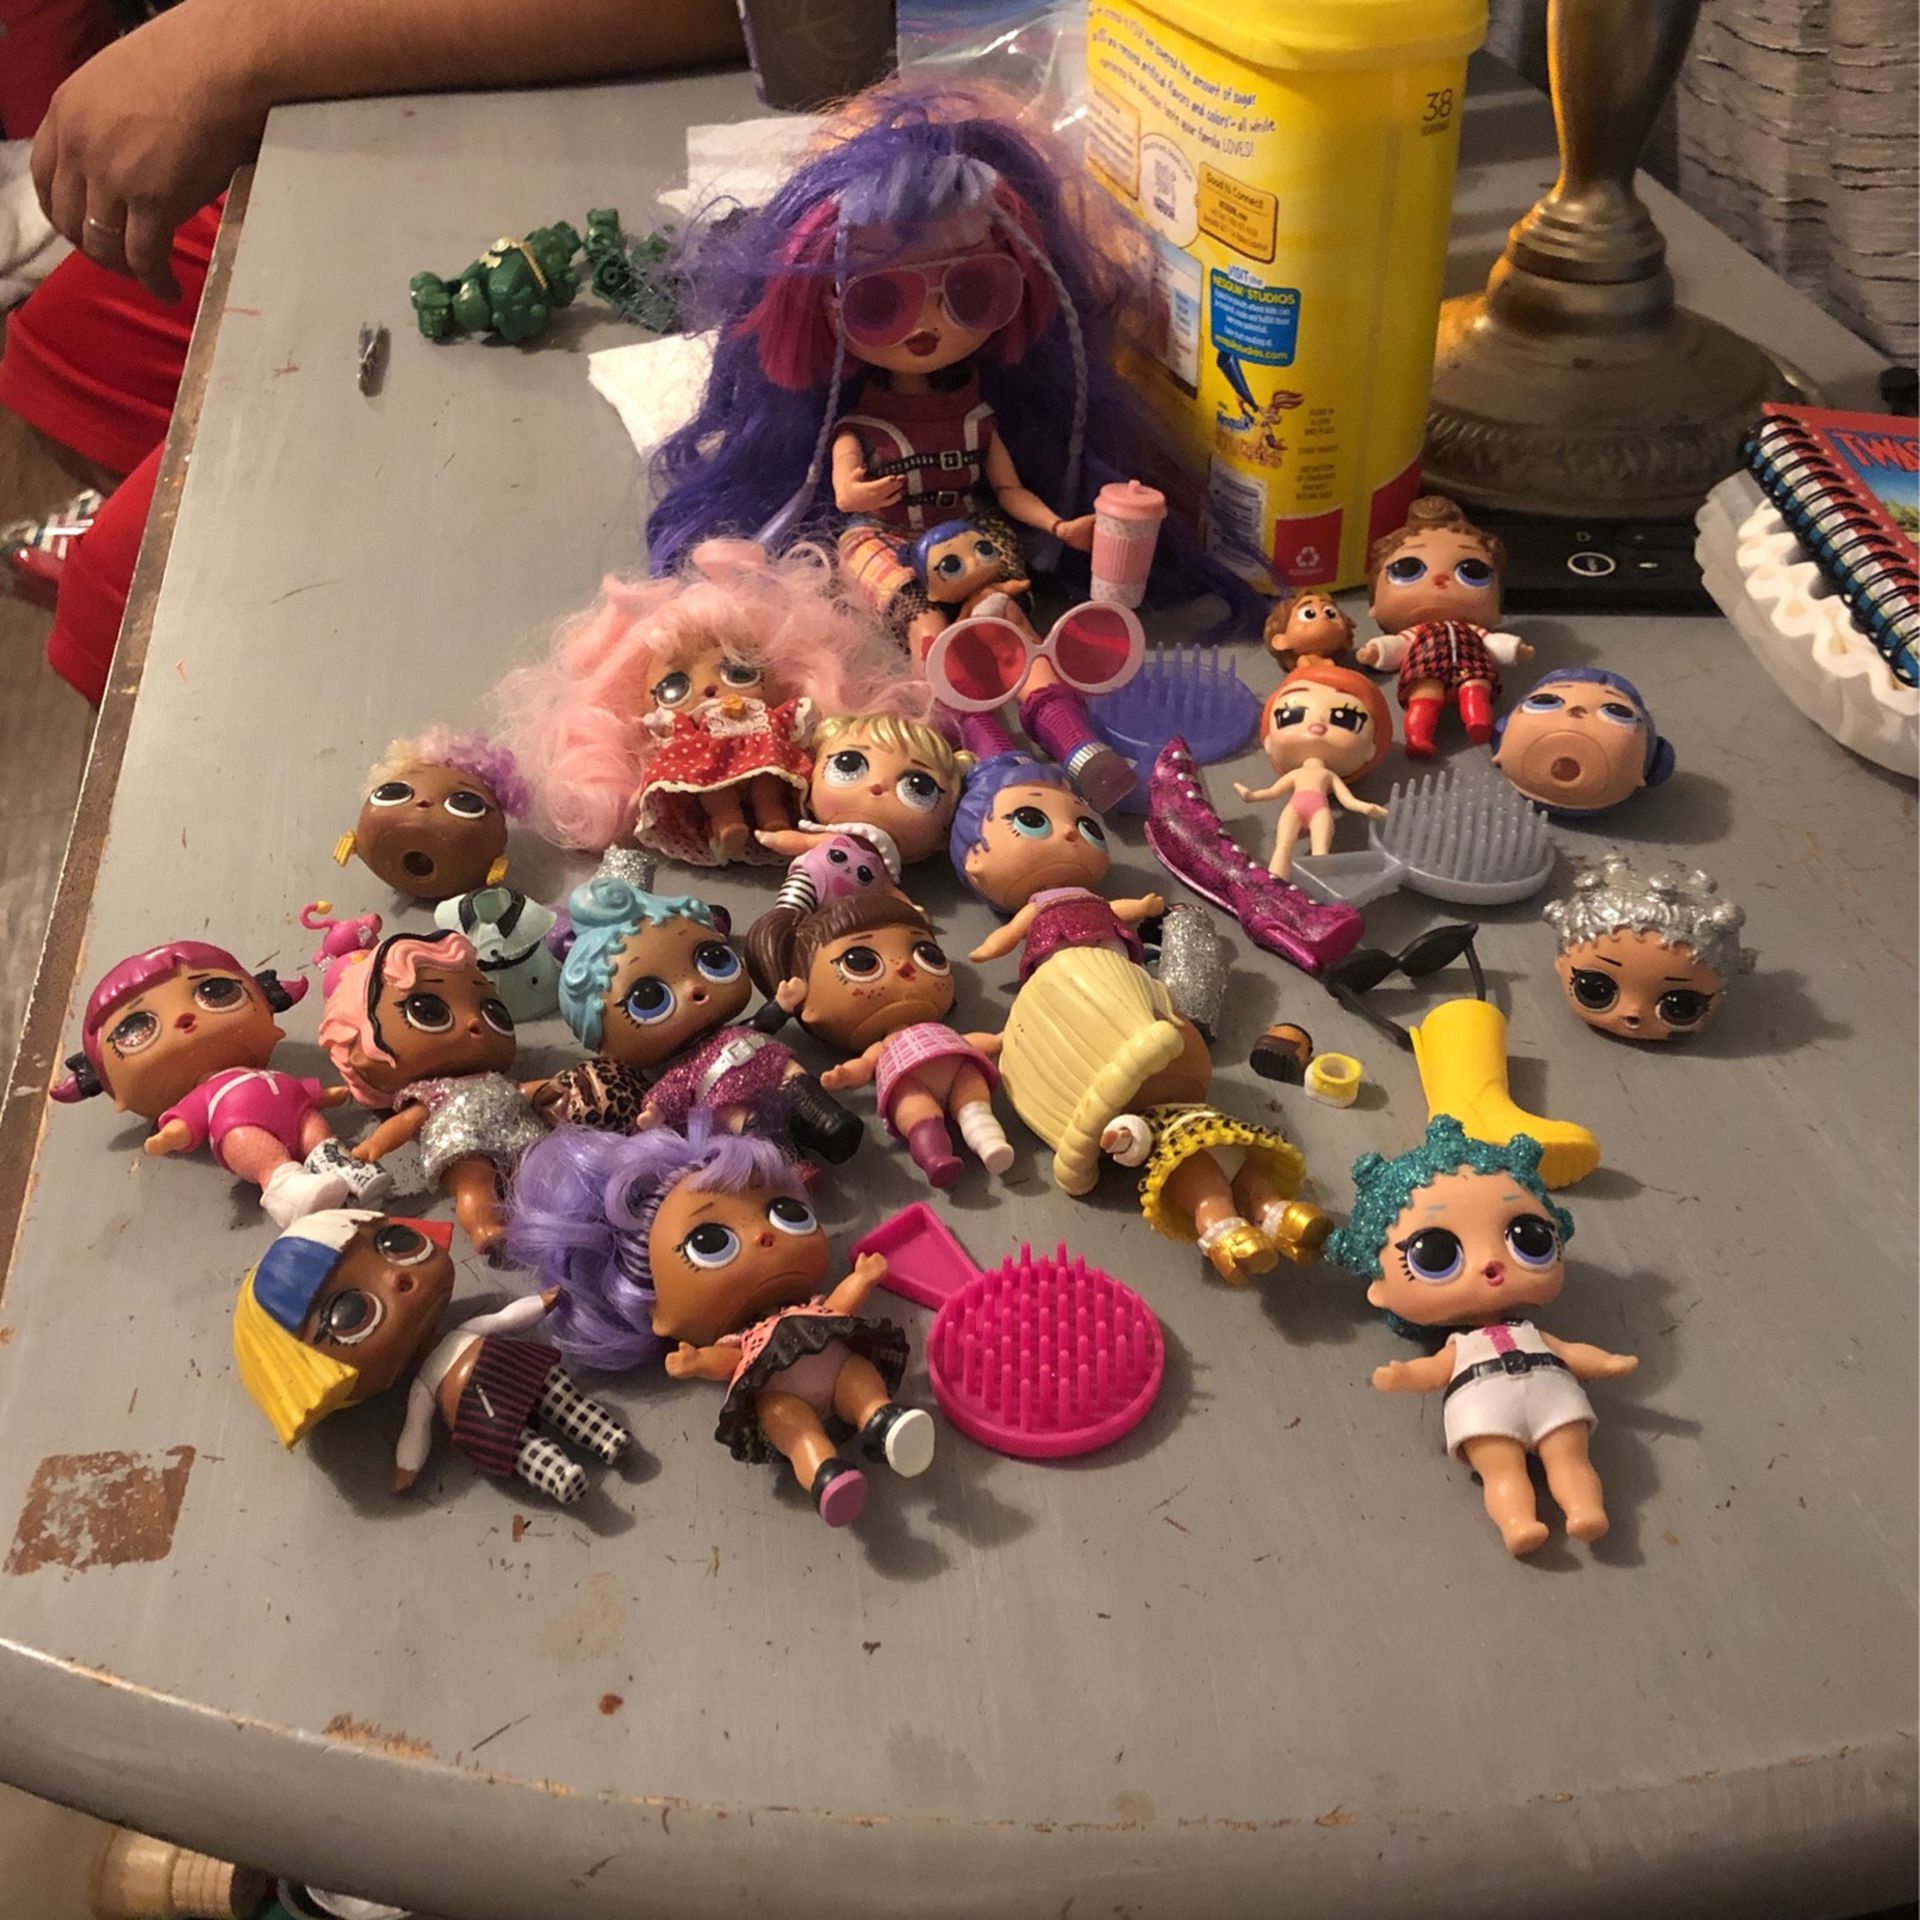 !! !!VERY cool Collection of LOL dolls and accessorie along with one big sister and one mini LOL doll foronly $60$!!!! make us an offer today